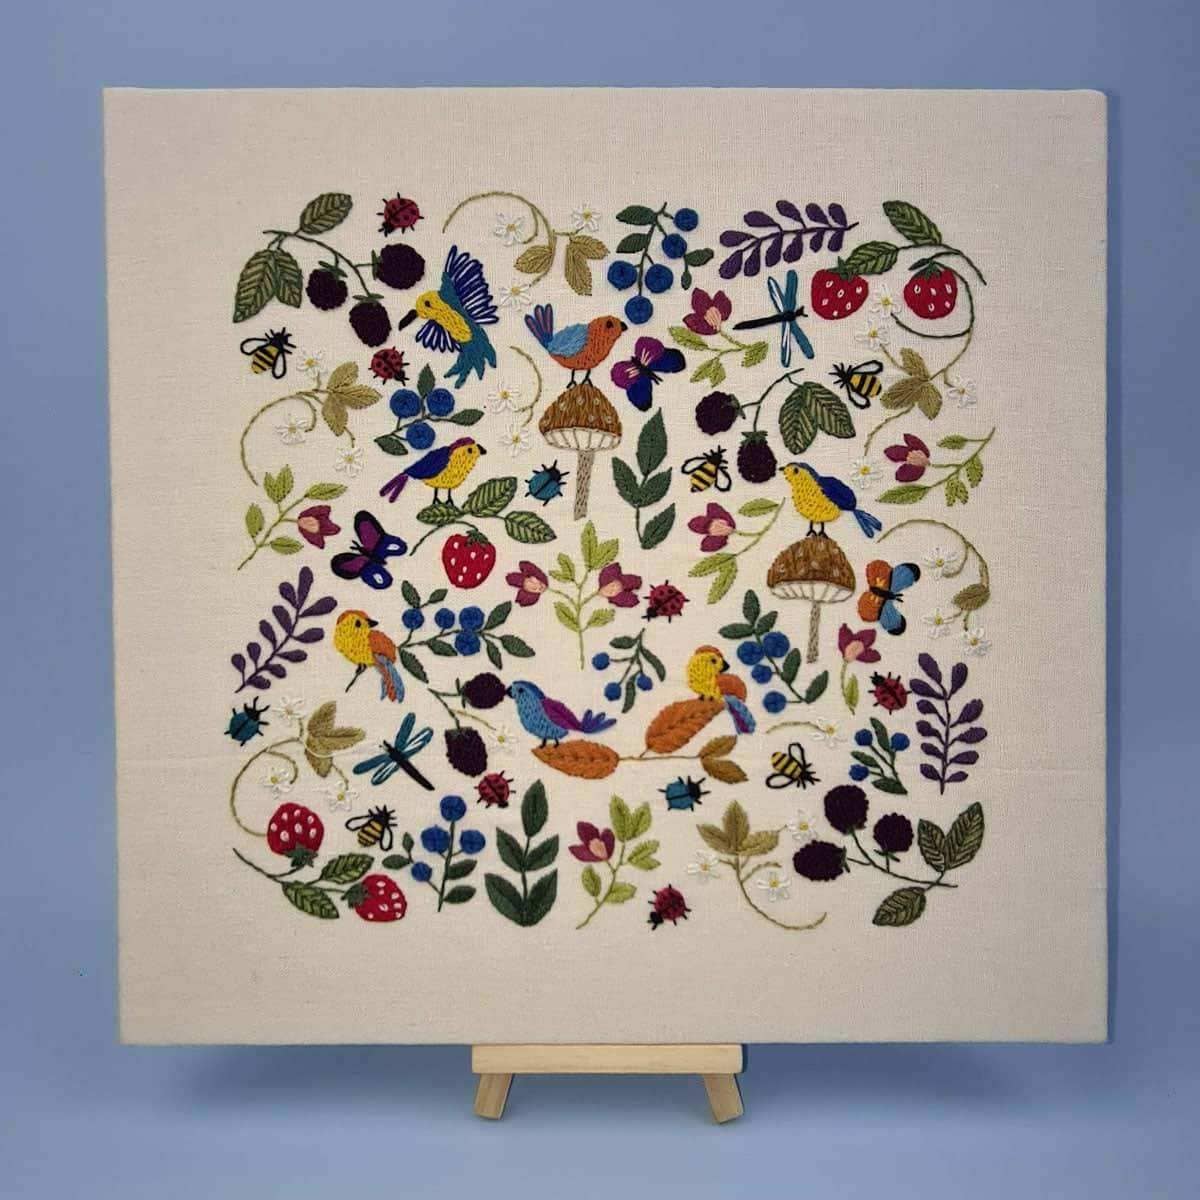 Birds, Bugs and Berries, Pre Printed Embroidery Fabric Panel PLUS PDF Pattern , Pre Printed Fabric Pattern , StitchDoodles , bird embroidery, Embroidery, embroidery hoop, embroidery hoop kit, Embroidery Kit, embroidery kit for adults, embroidery kit fro beginners, embroidery pattern, hand embroidery, hand embroidery fabric, hand embroidery kit, hand embroidery seat frame, modern embroidery kits, nurge embroidery hoop, PDF pattern, Printed Pattern, wildlife embroidery , StitchDoodles , shop.stitchdoodles.com